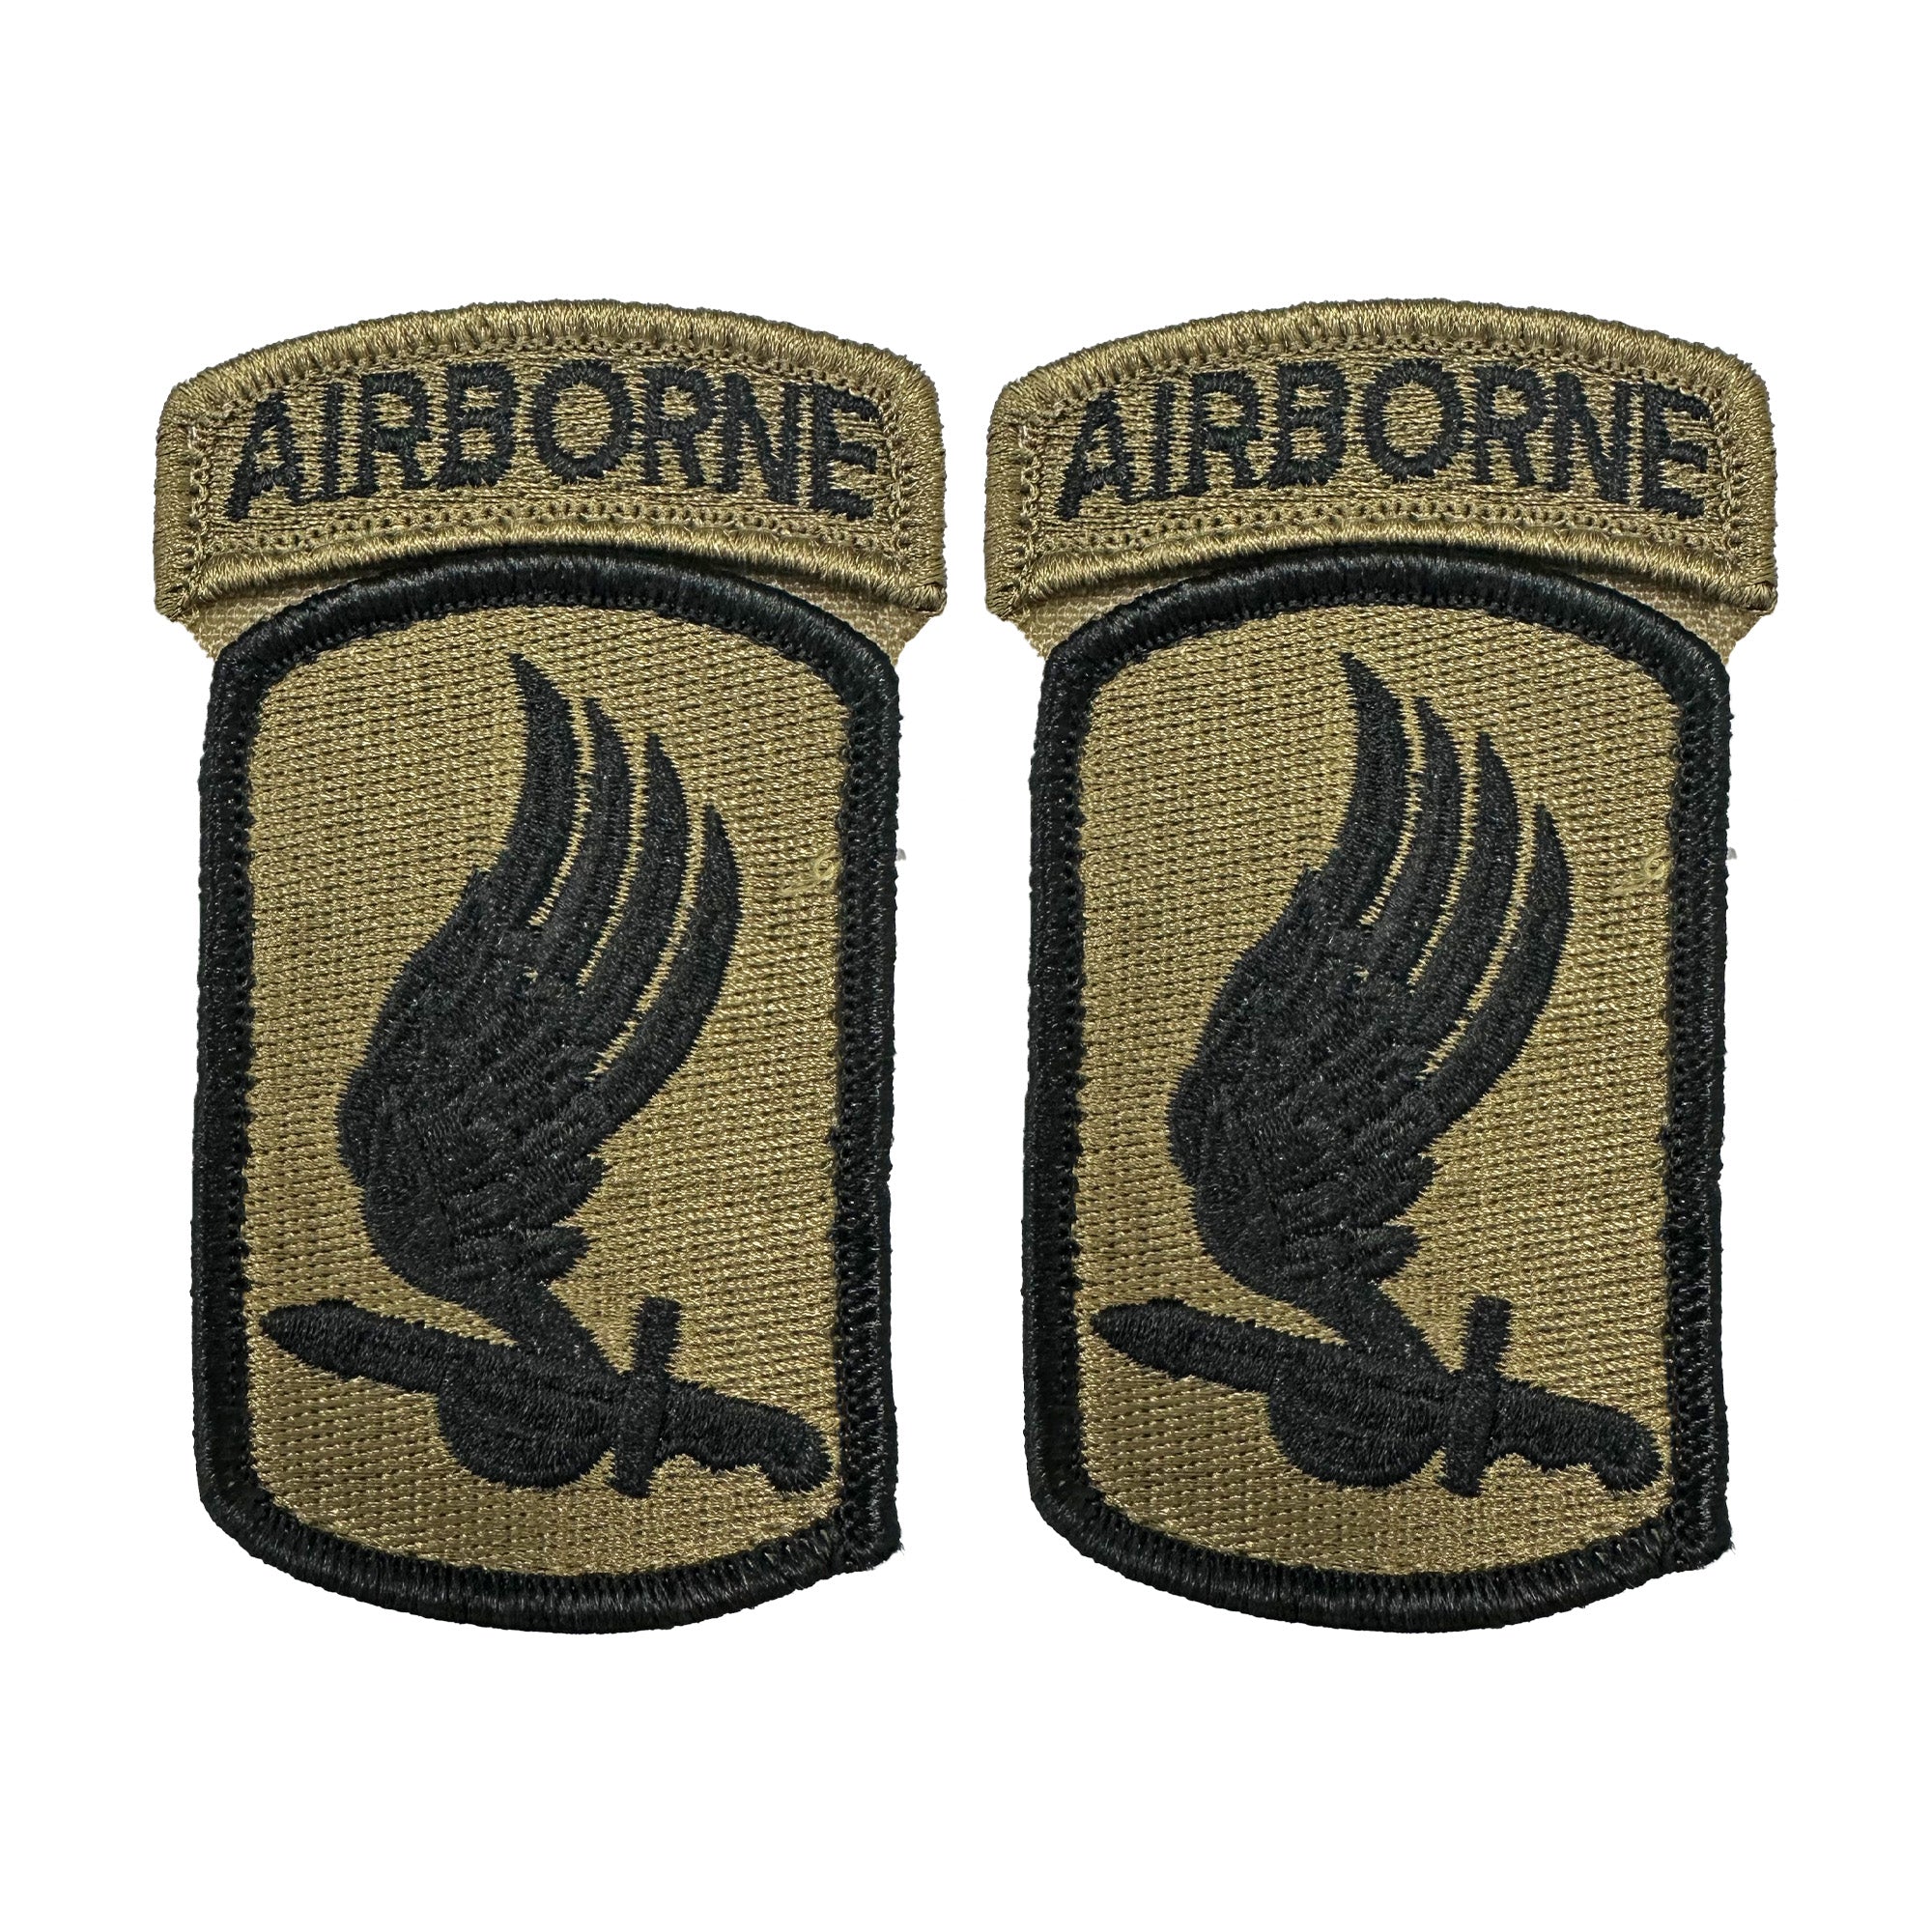 173rd Airborne Brigade OCP Patch with Hook Fastener and Airborne Tab (pair) - Insignia Depot